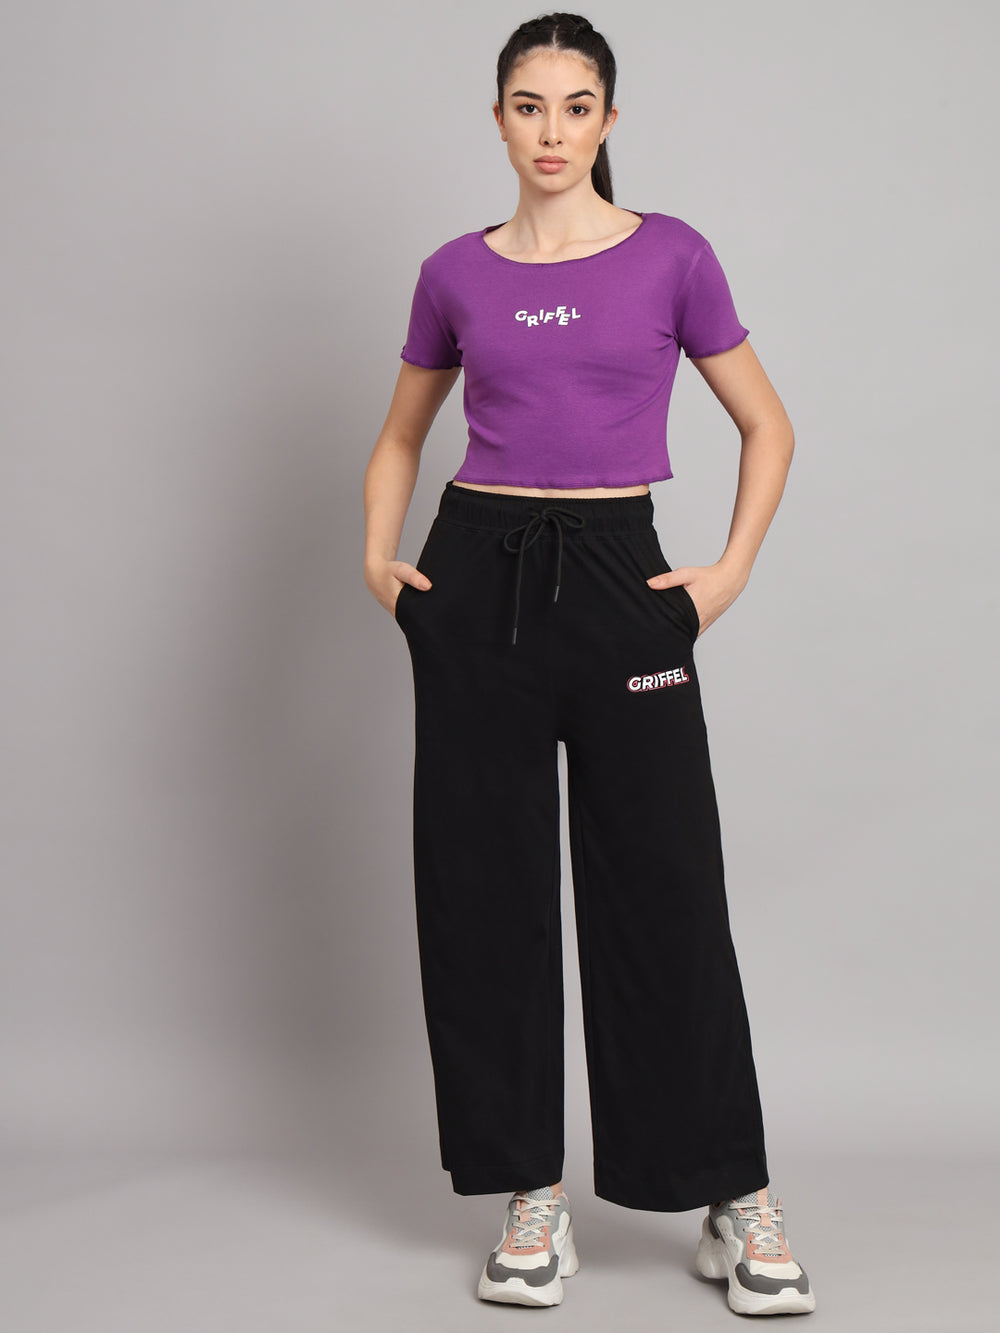 GRIFFEL Women Printed Slim fit Purple T-shirt and Palazo Pant Set - griffel